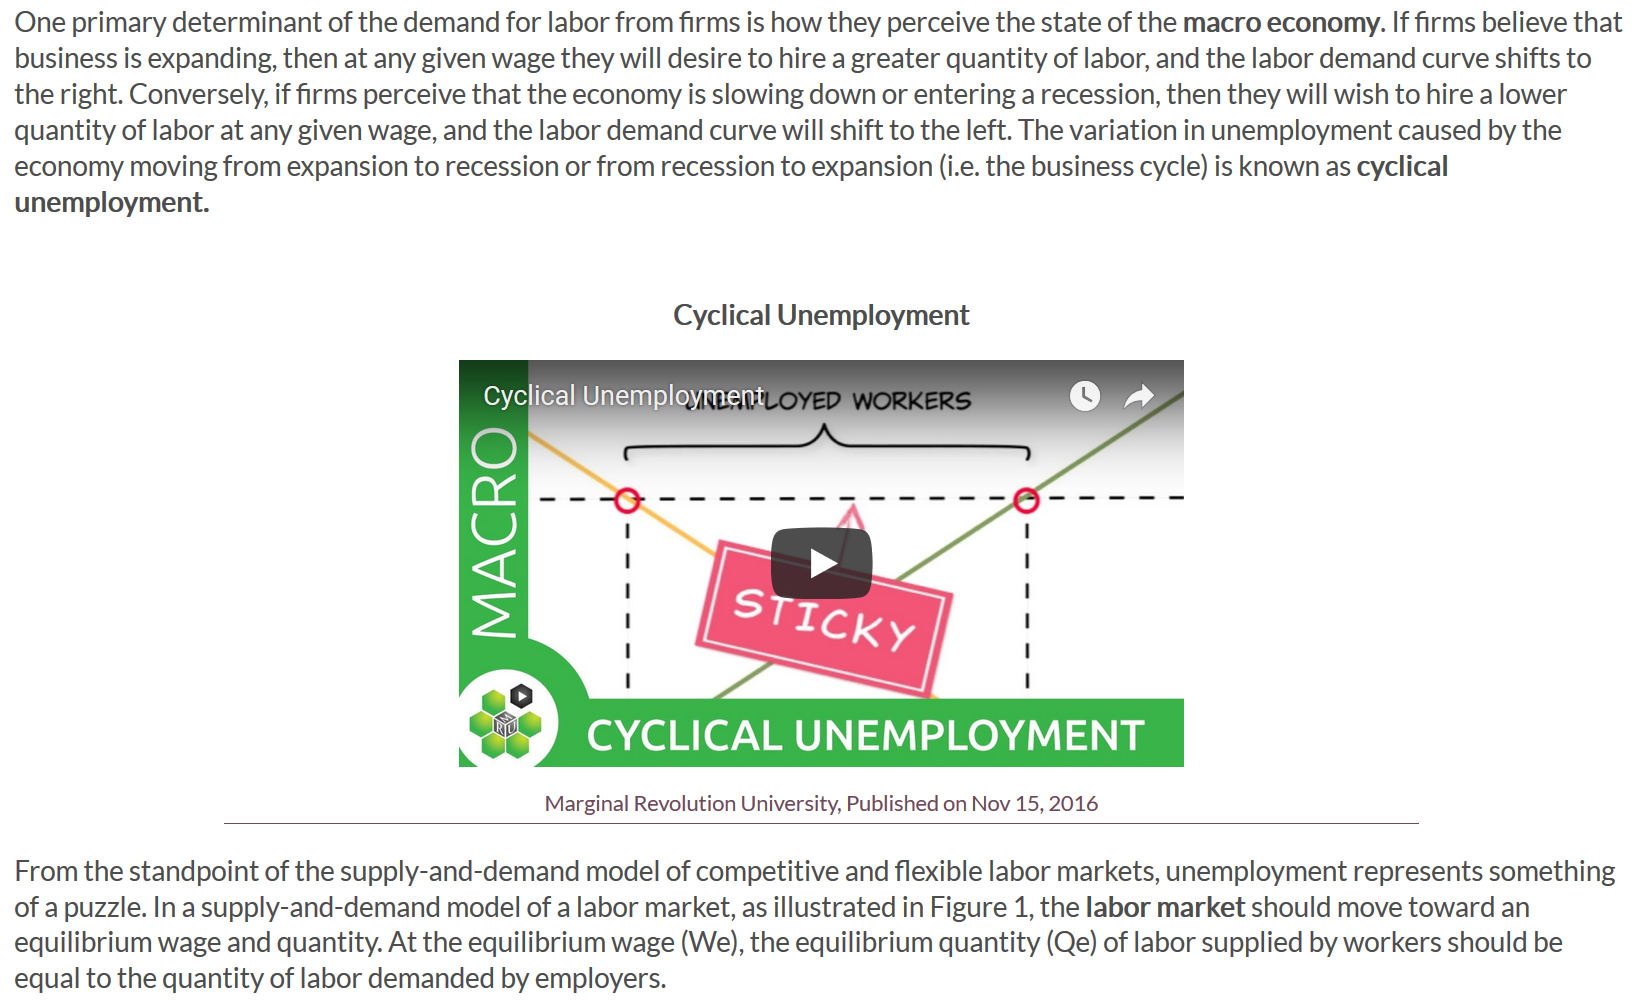 An image of a video embedded using the code to add title and caption. The title states "Cyclical Unemployement" and the caption reads the source and publish date. 